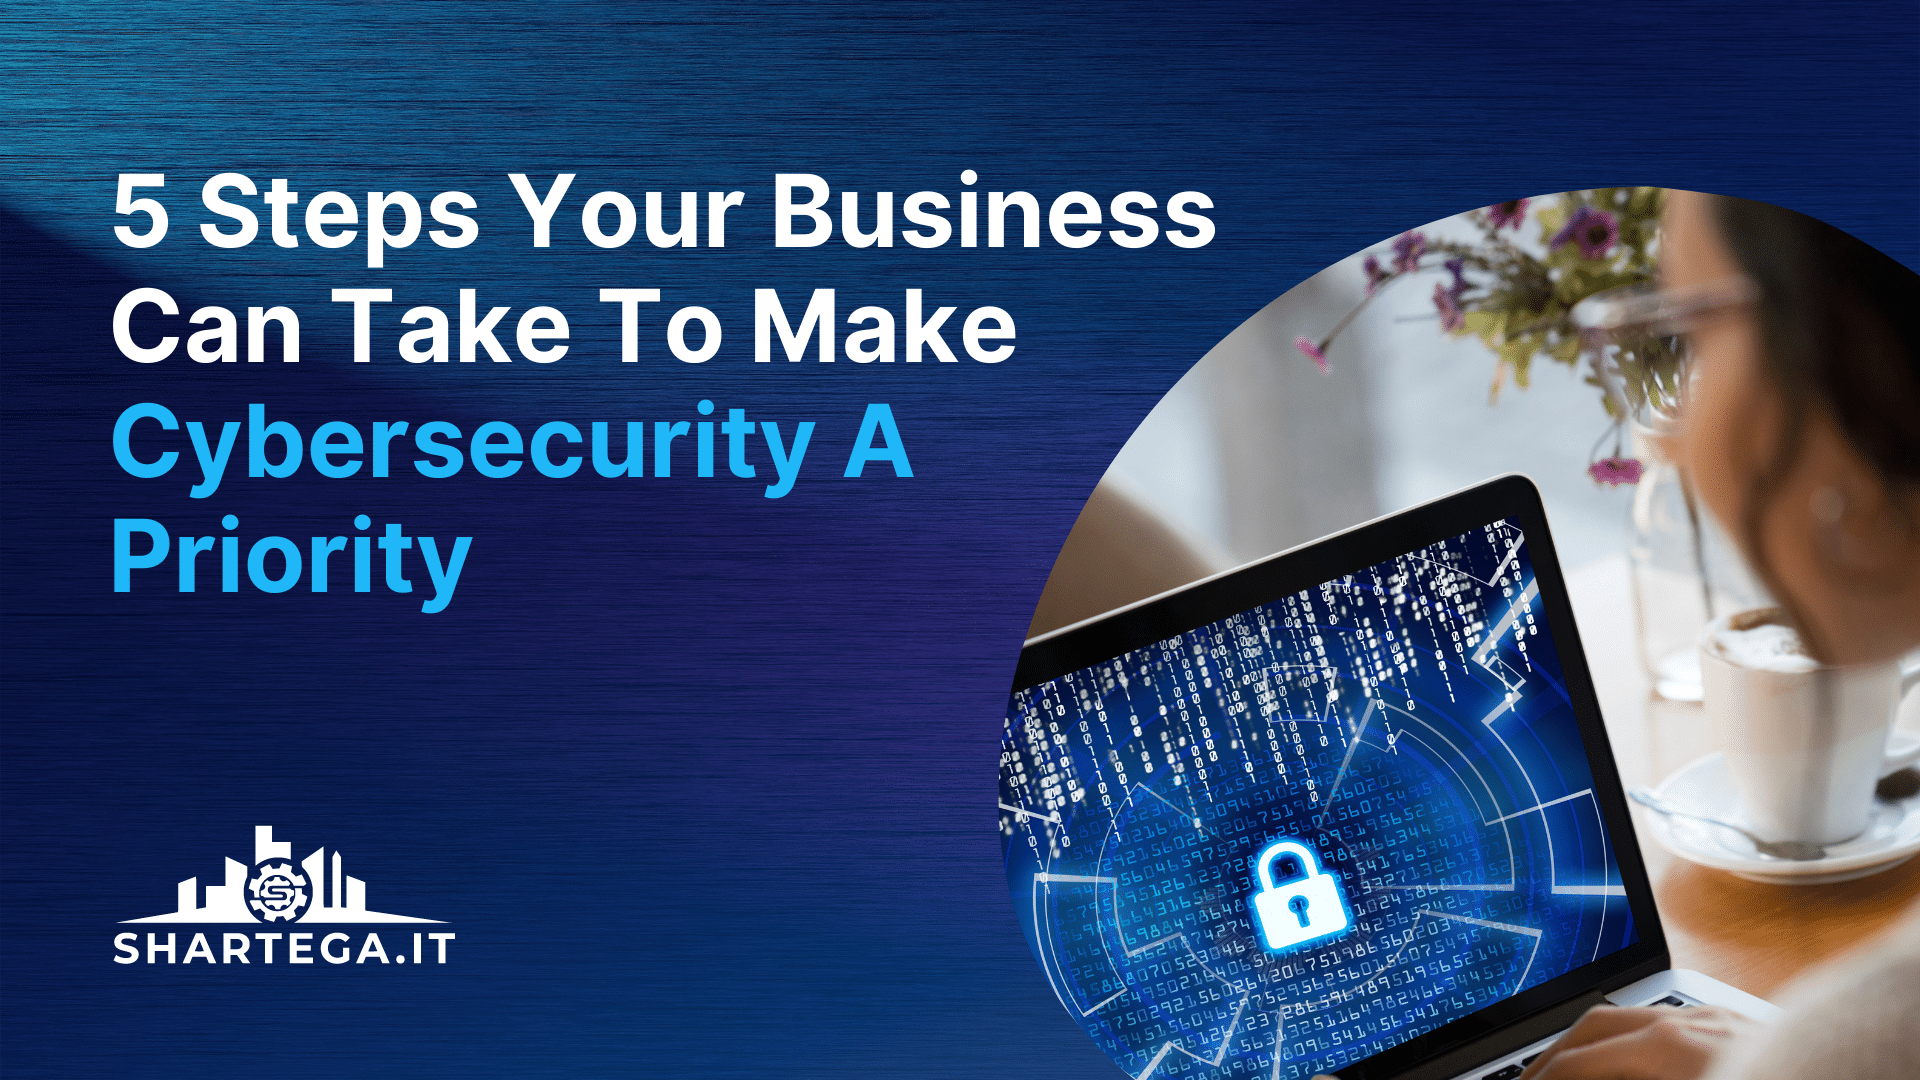 5 Steps Your Business Can Take To Make Cybersecurity A Priority